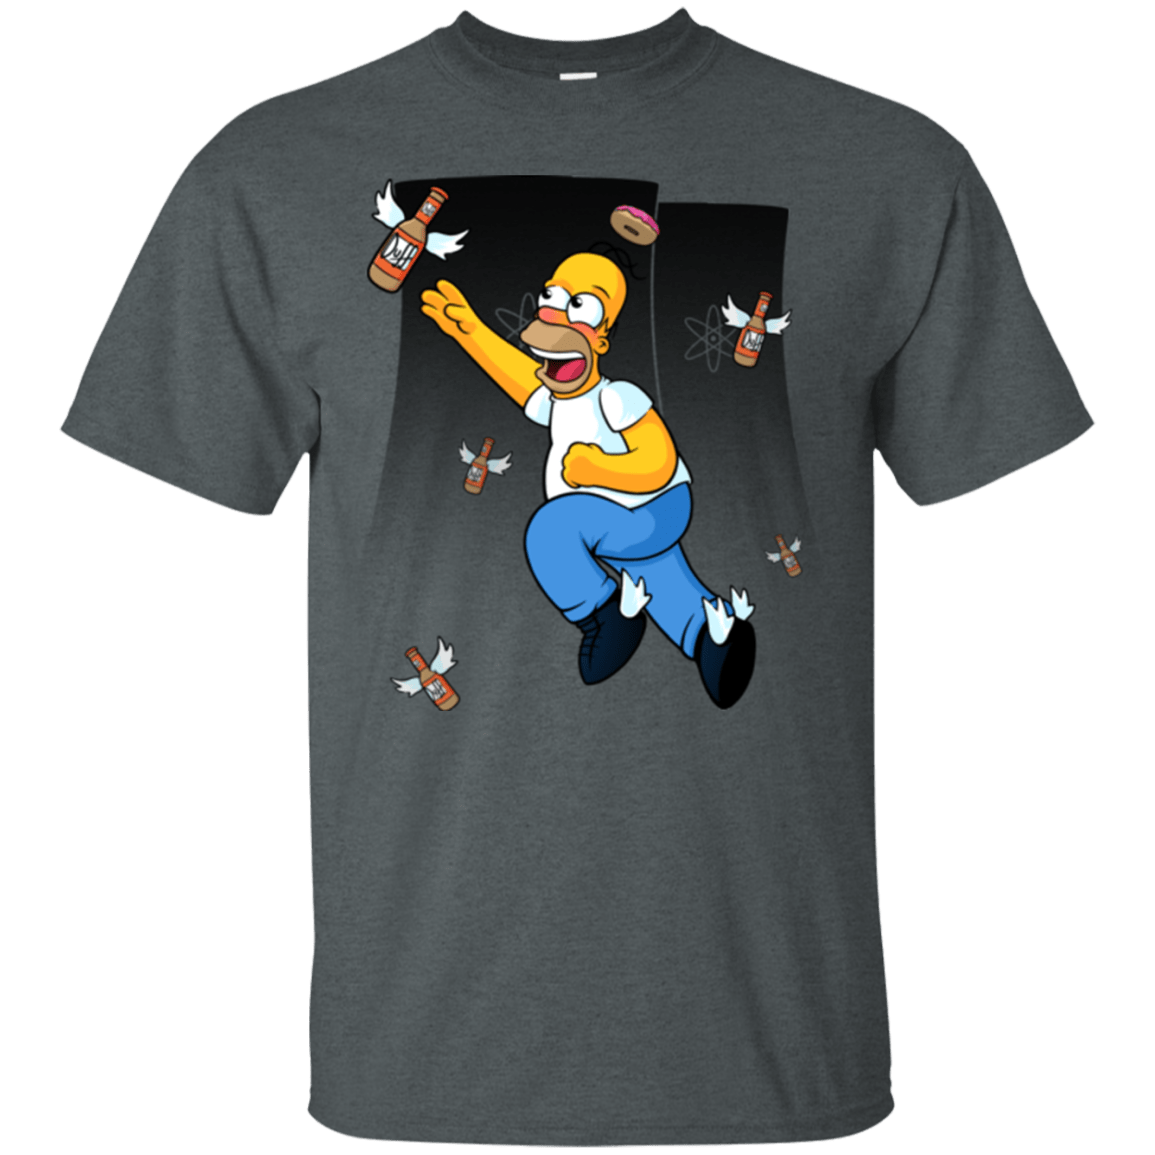 T-Shirts Dark Heather / Small Duff Gives Wings T-Shirt